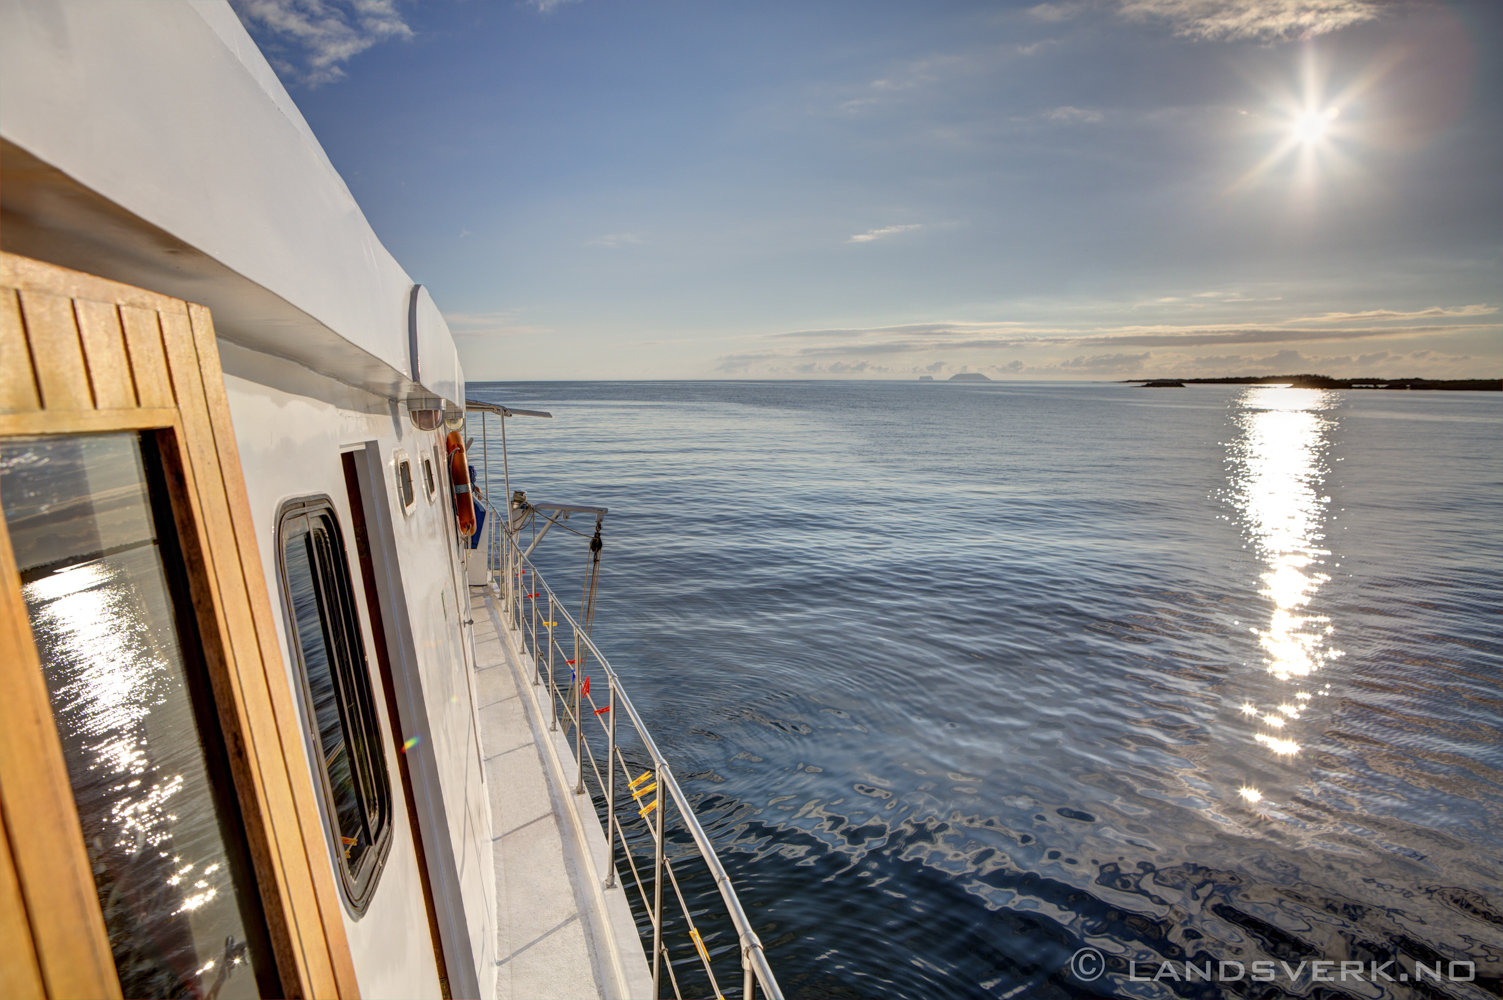 Sailing between the Galapagos Islands. 

(Canon EOS 5D Mark III / Canon EF 24-70mm f/2.8 L USM)